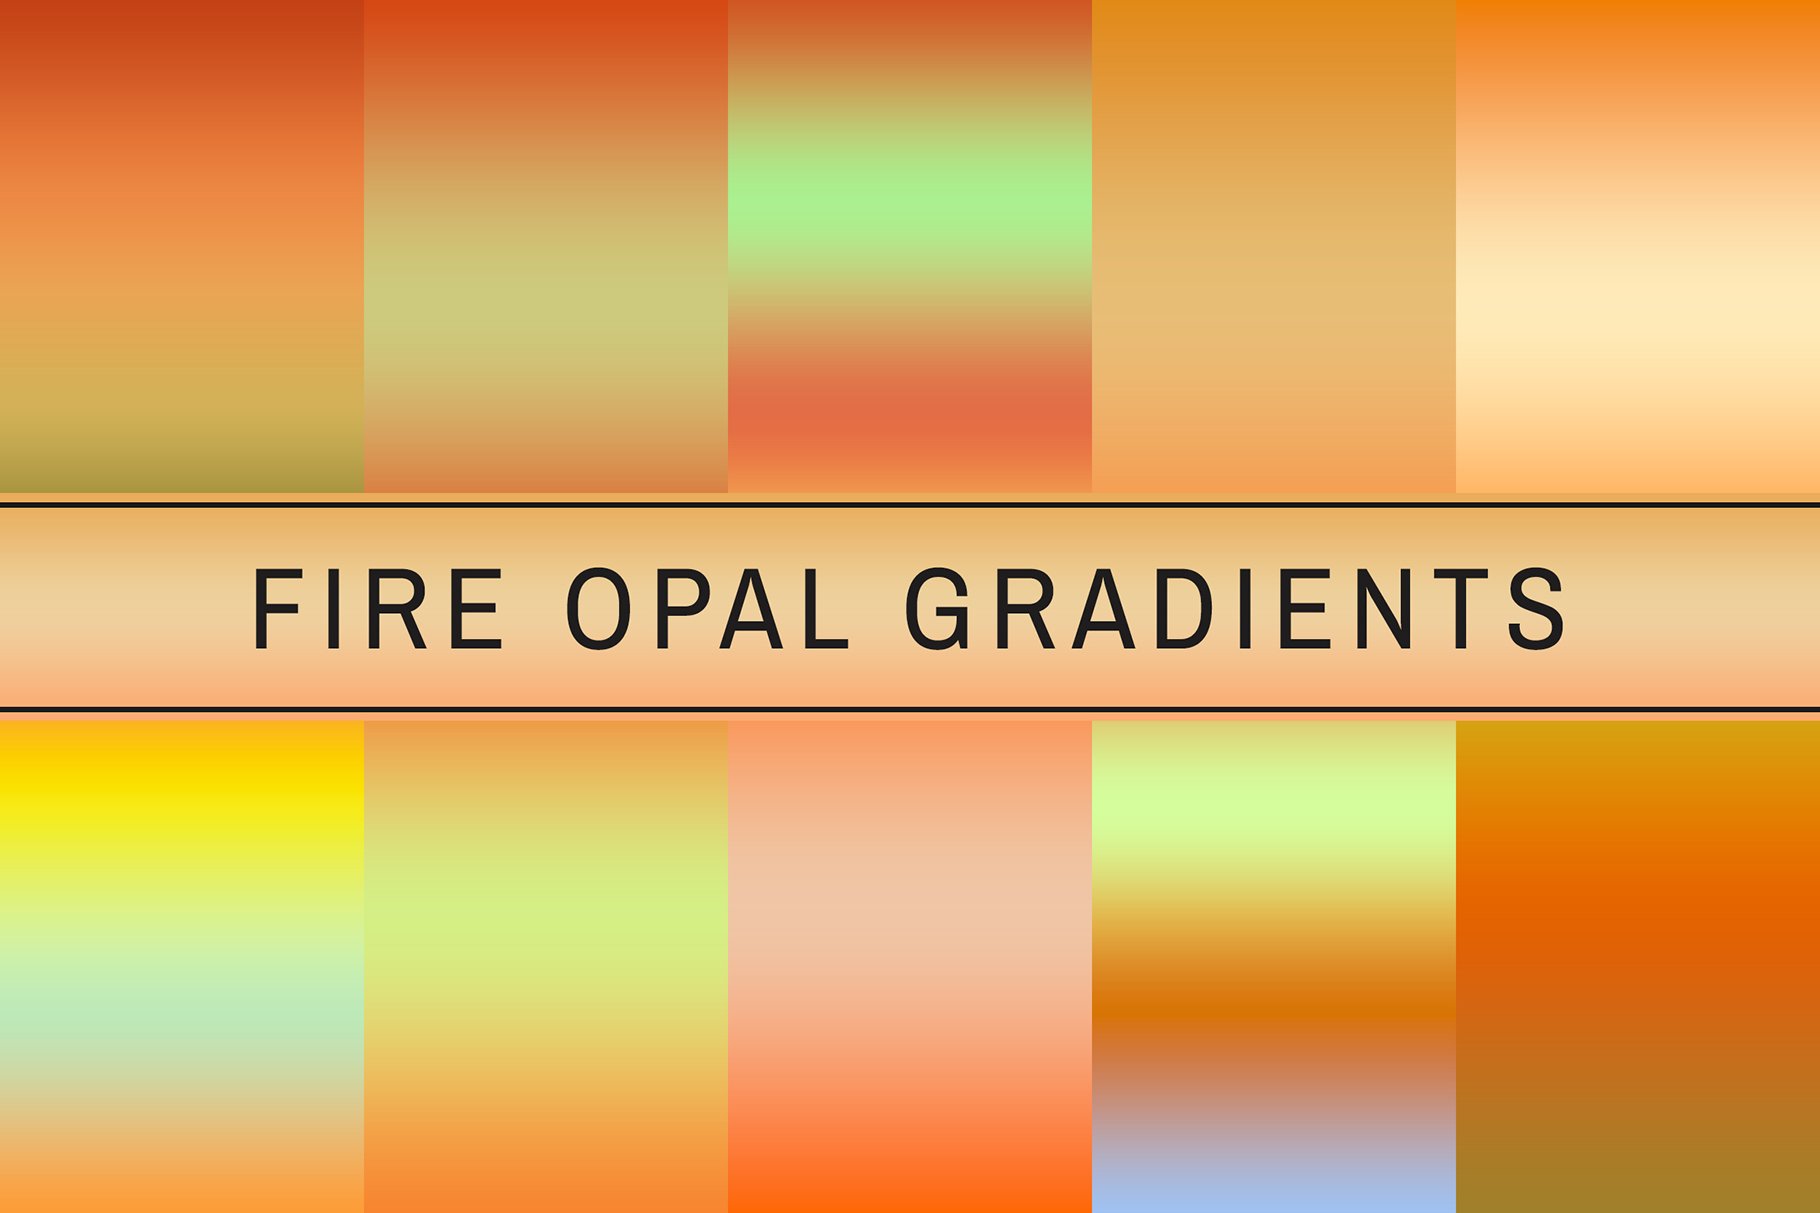 Fire Opal Gradients cover image.